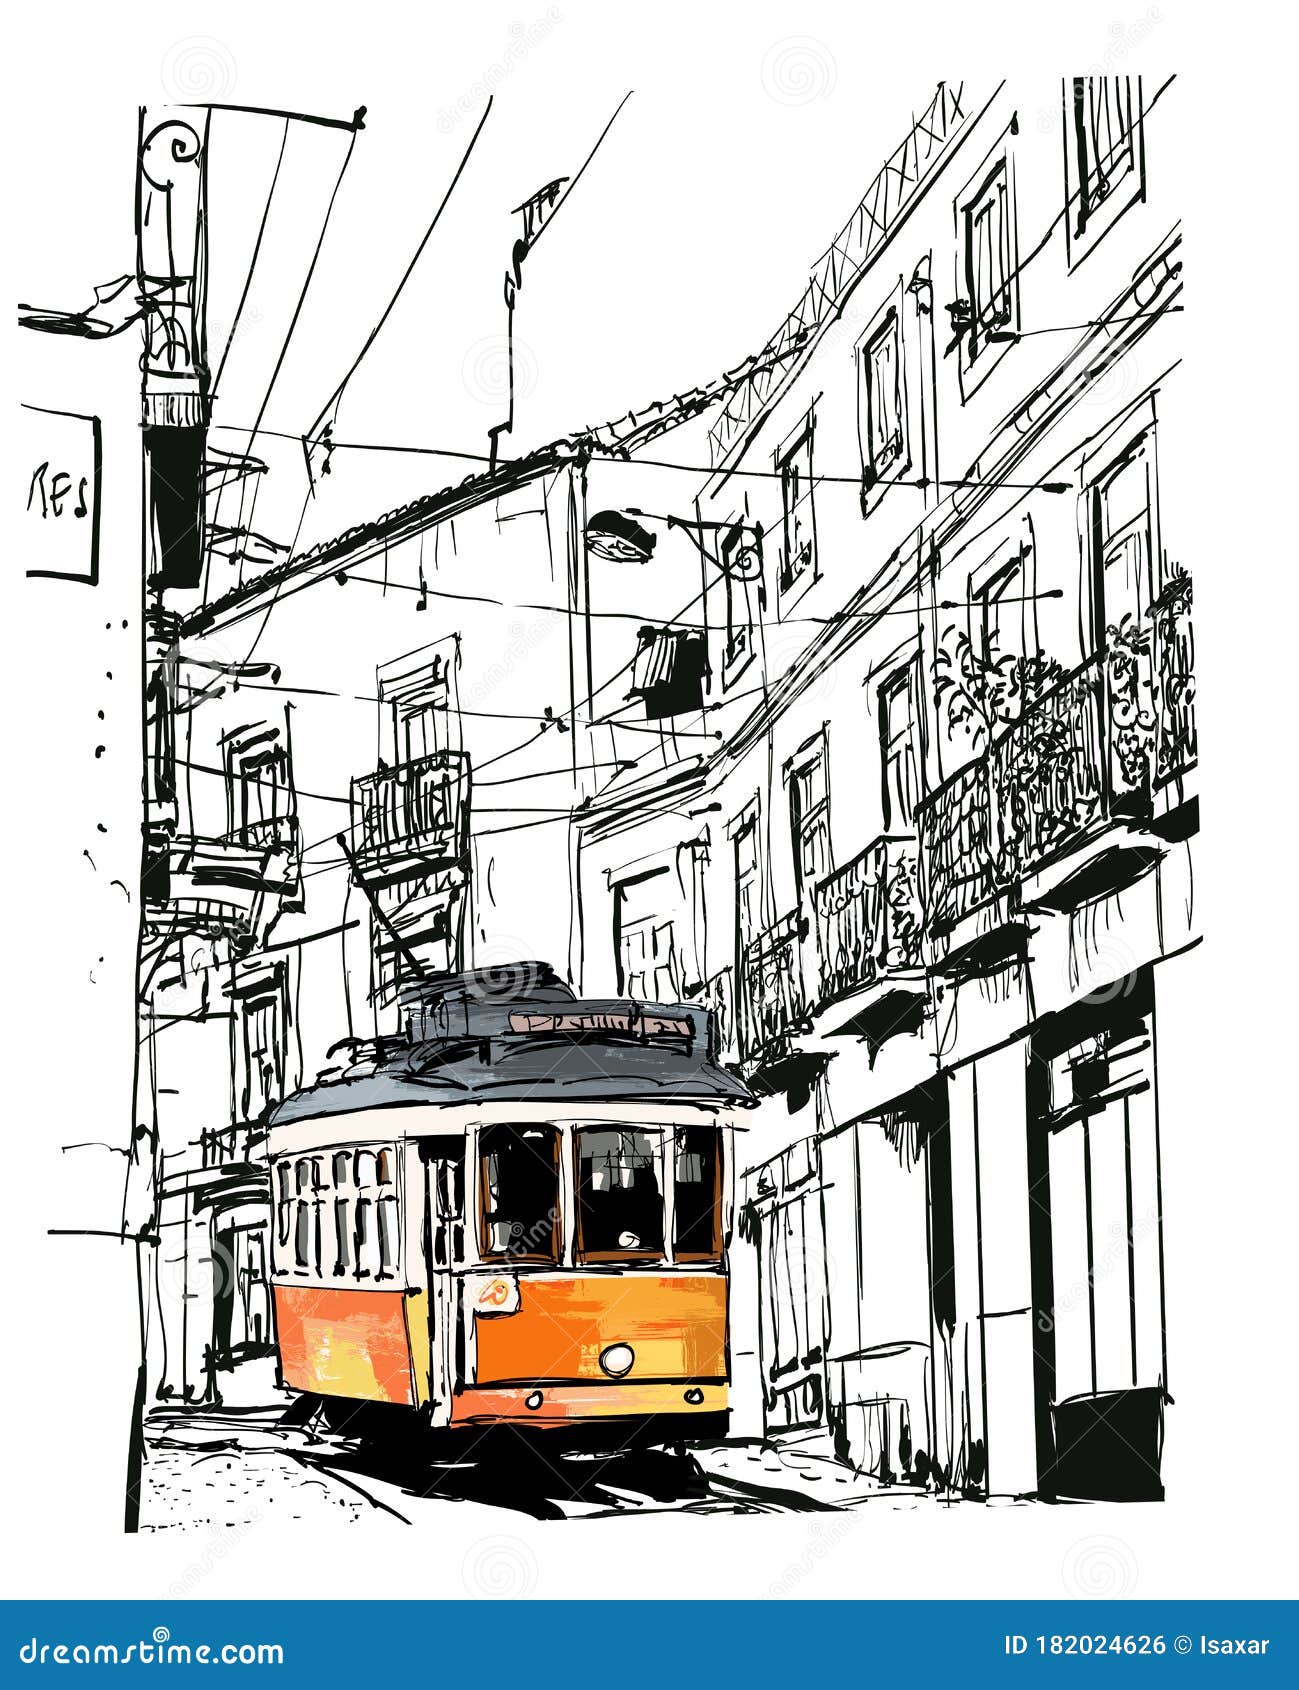 street view with famous old tram in lisbon city, portugal